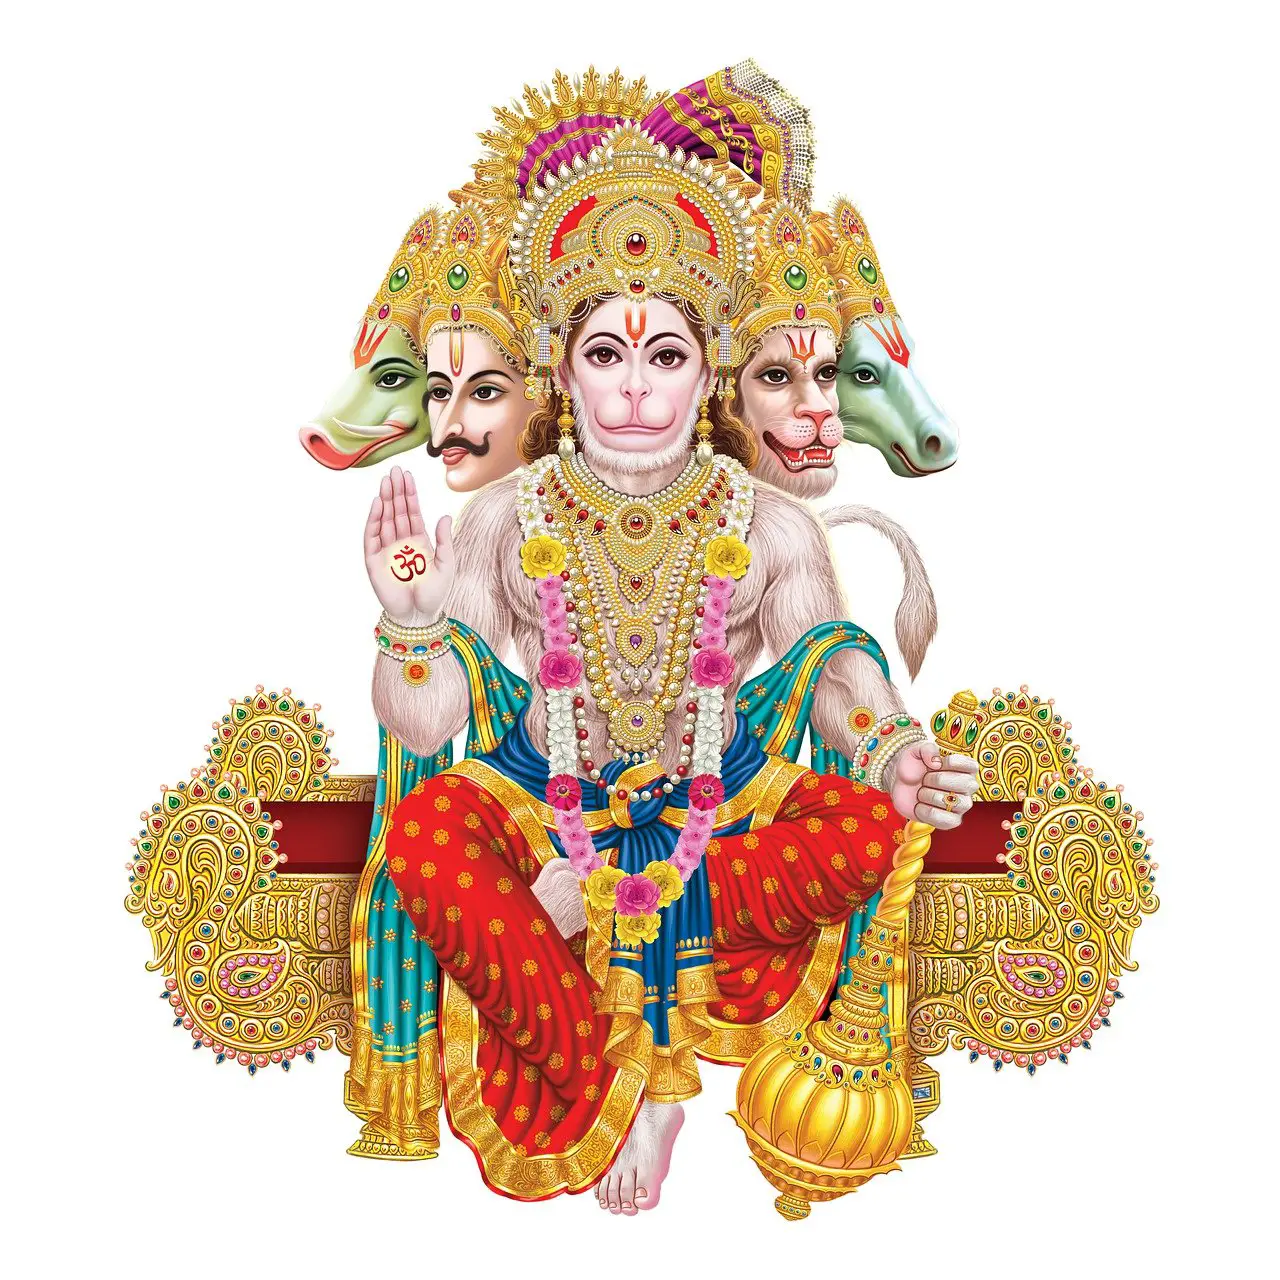 Hindu Gods Have Many Hands and Heads